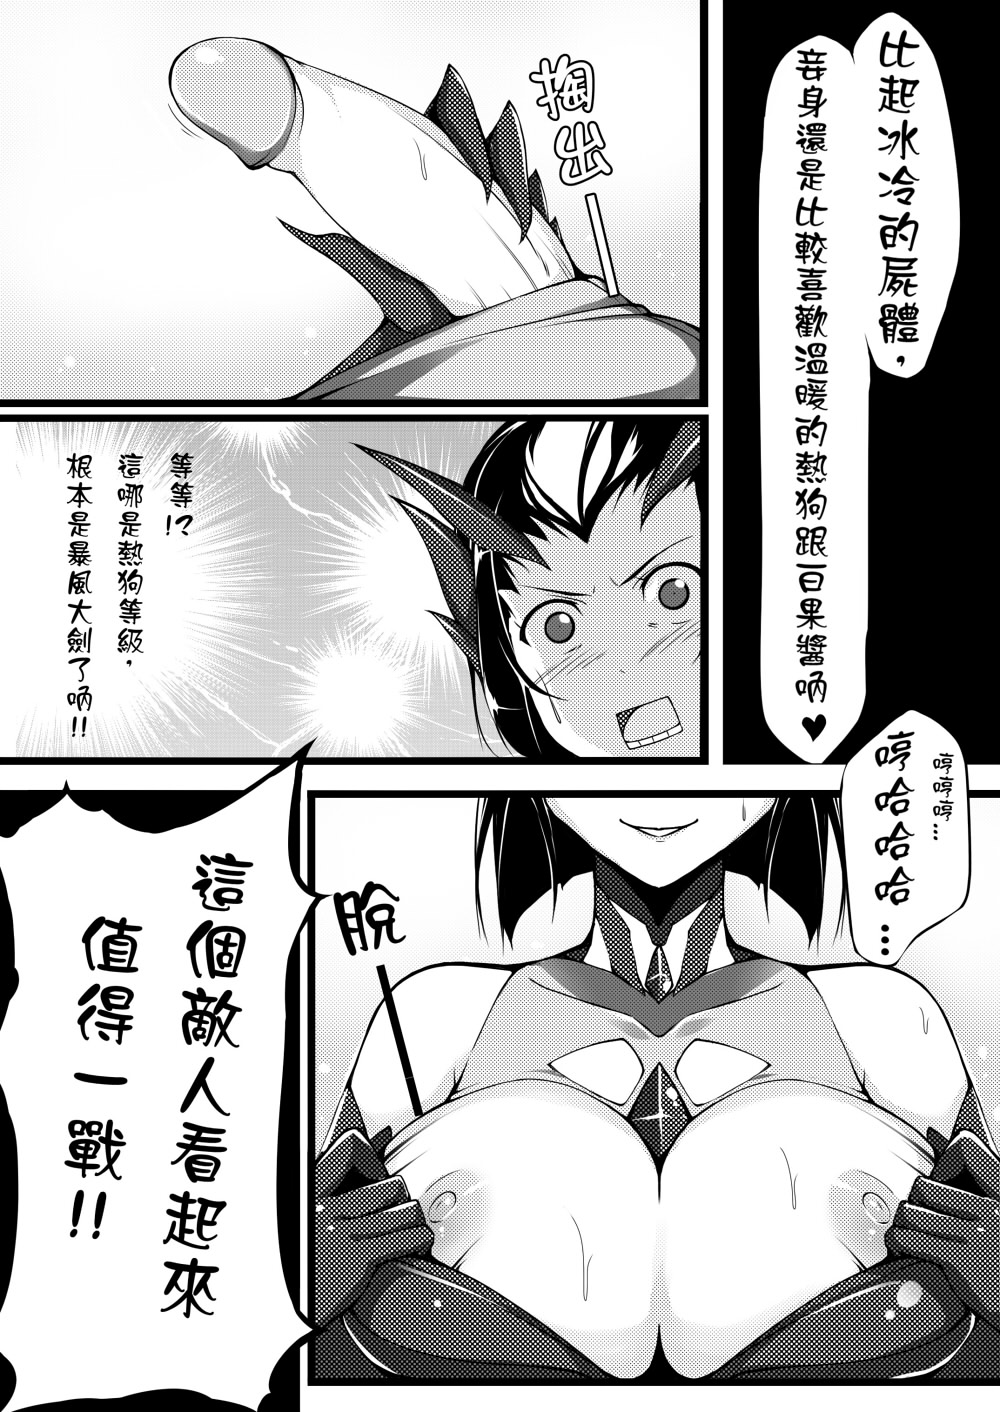 (FF22) [帝恩轉珠鎮守府(Dean)] 蜘蛛王女-Darkness (League of Legends)[Chinese] page 4 full